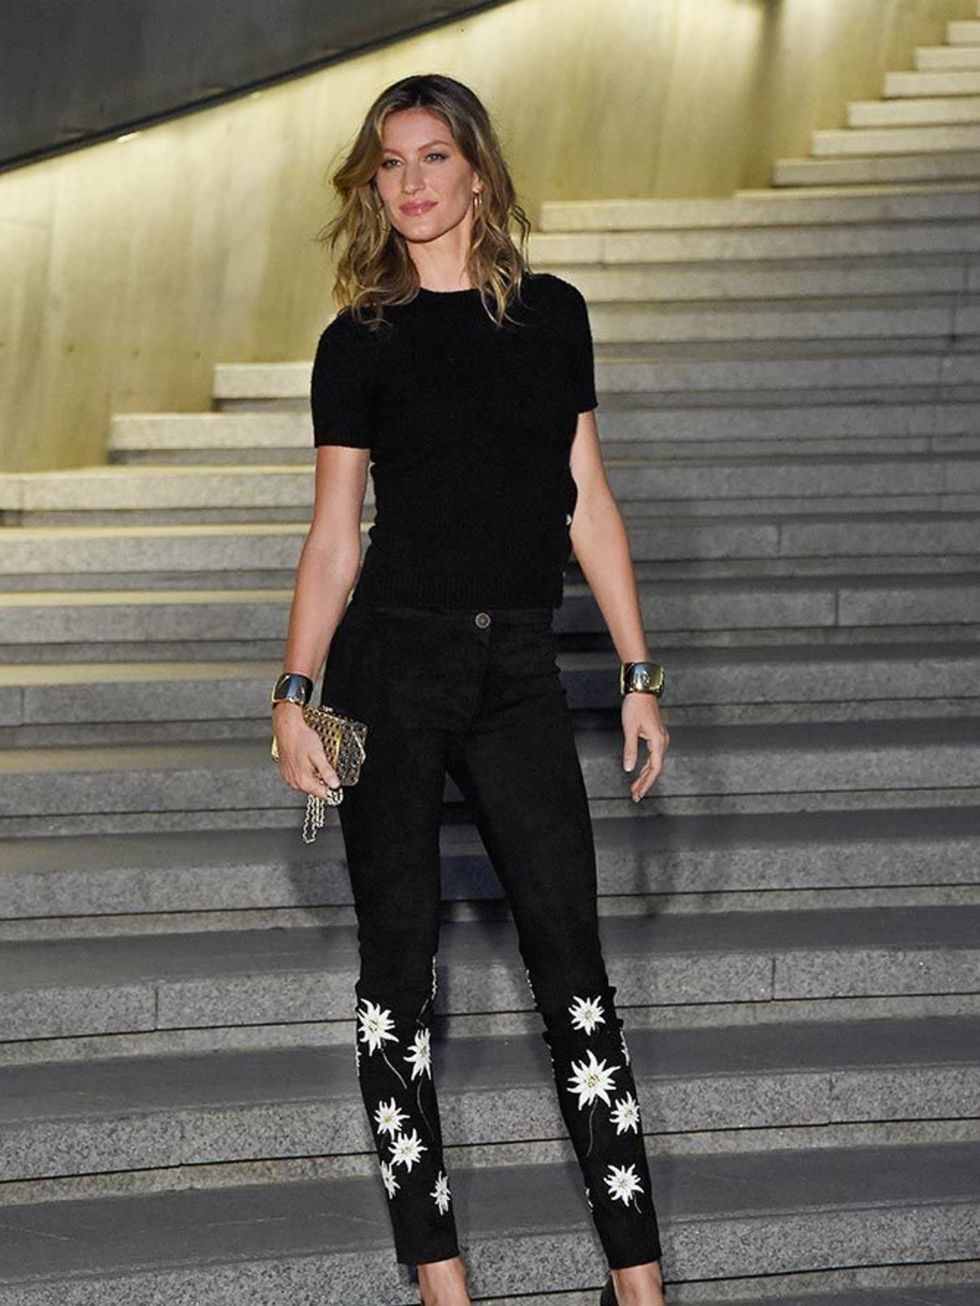 Gisele Bundchen attends the Chanel Cruise 2015/16 show in Seoul, May 2015.